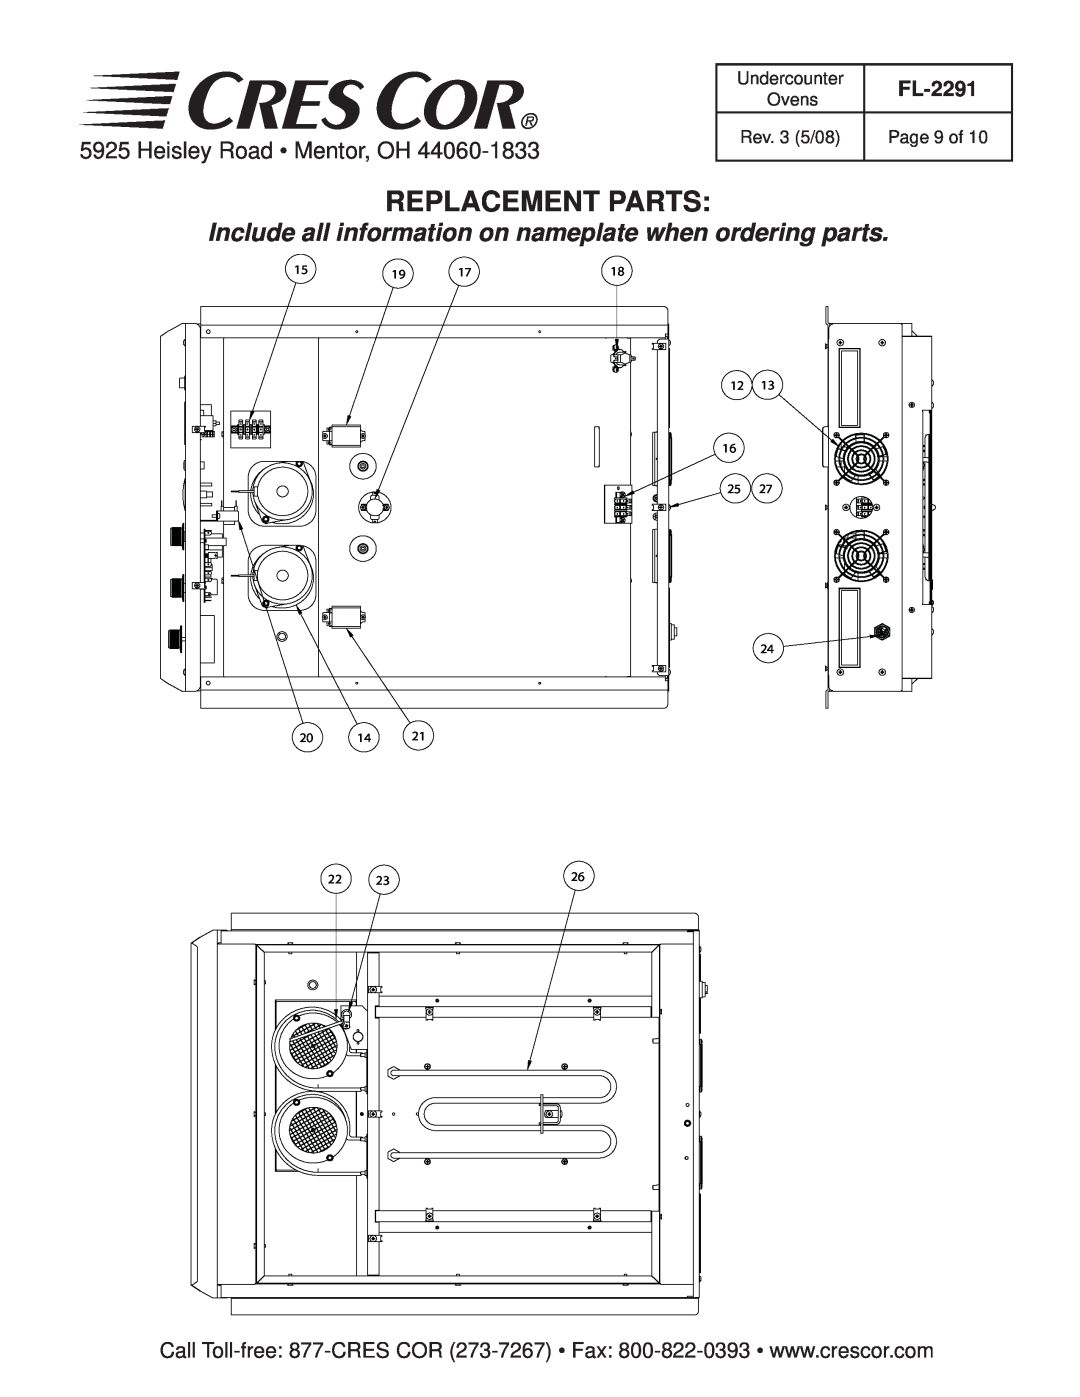 Cres Cor FL-2291 Replacement Parts, Include all information on nameplate when ordering parts, Heisley Road Mentor, OH 